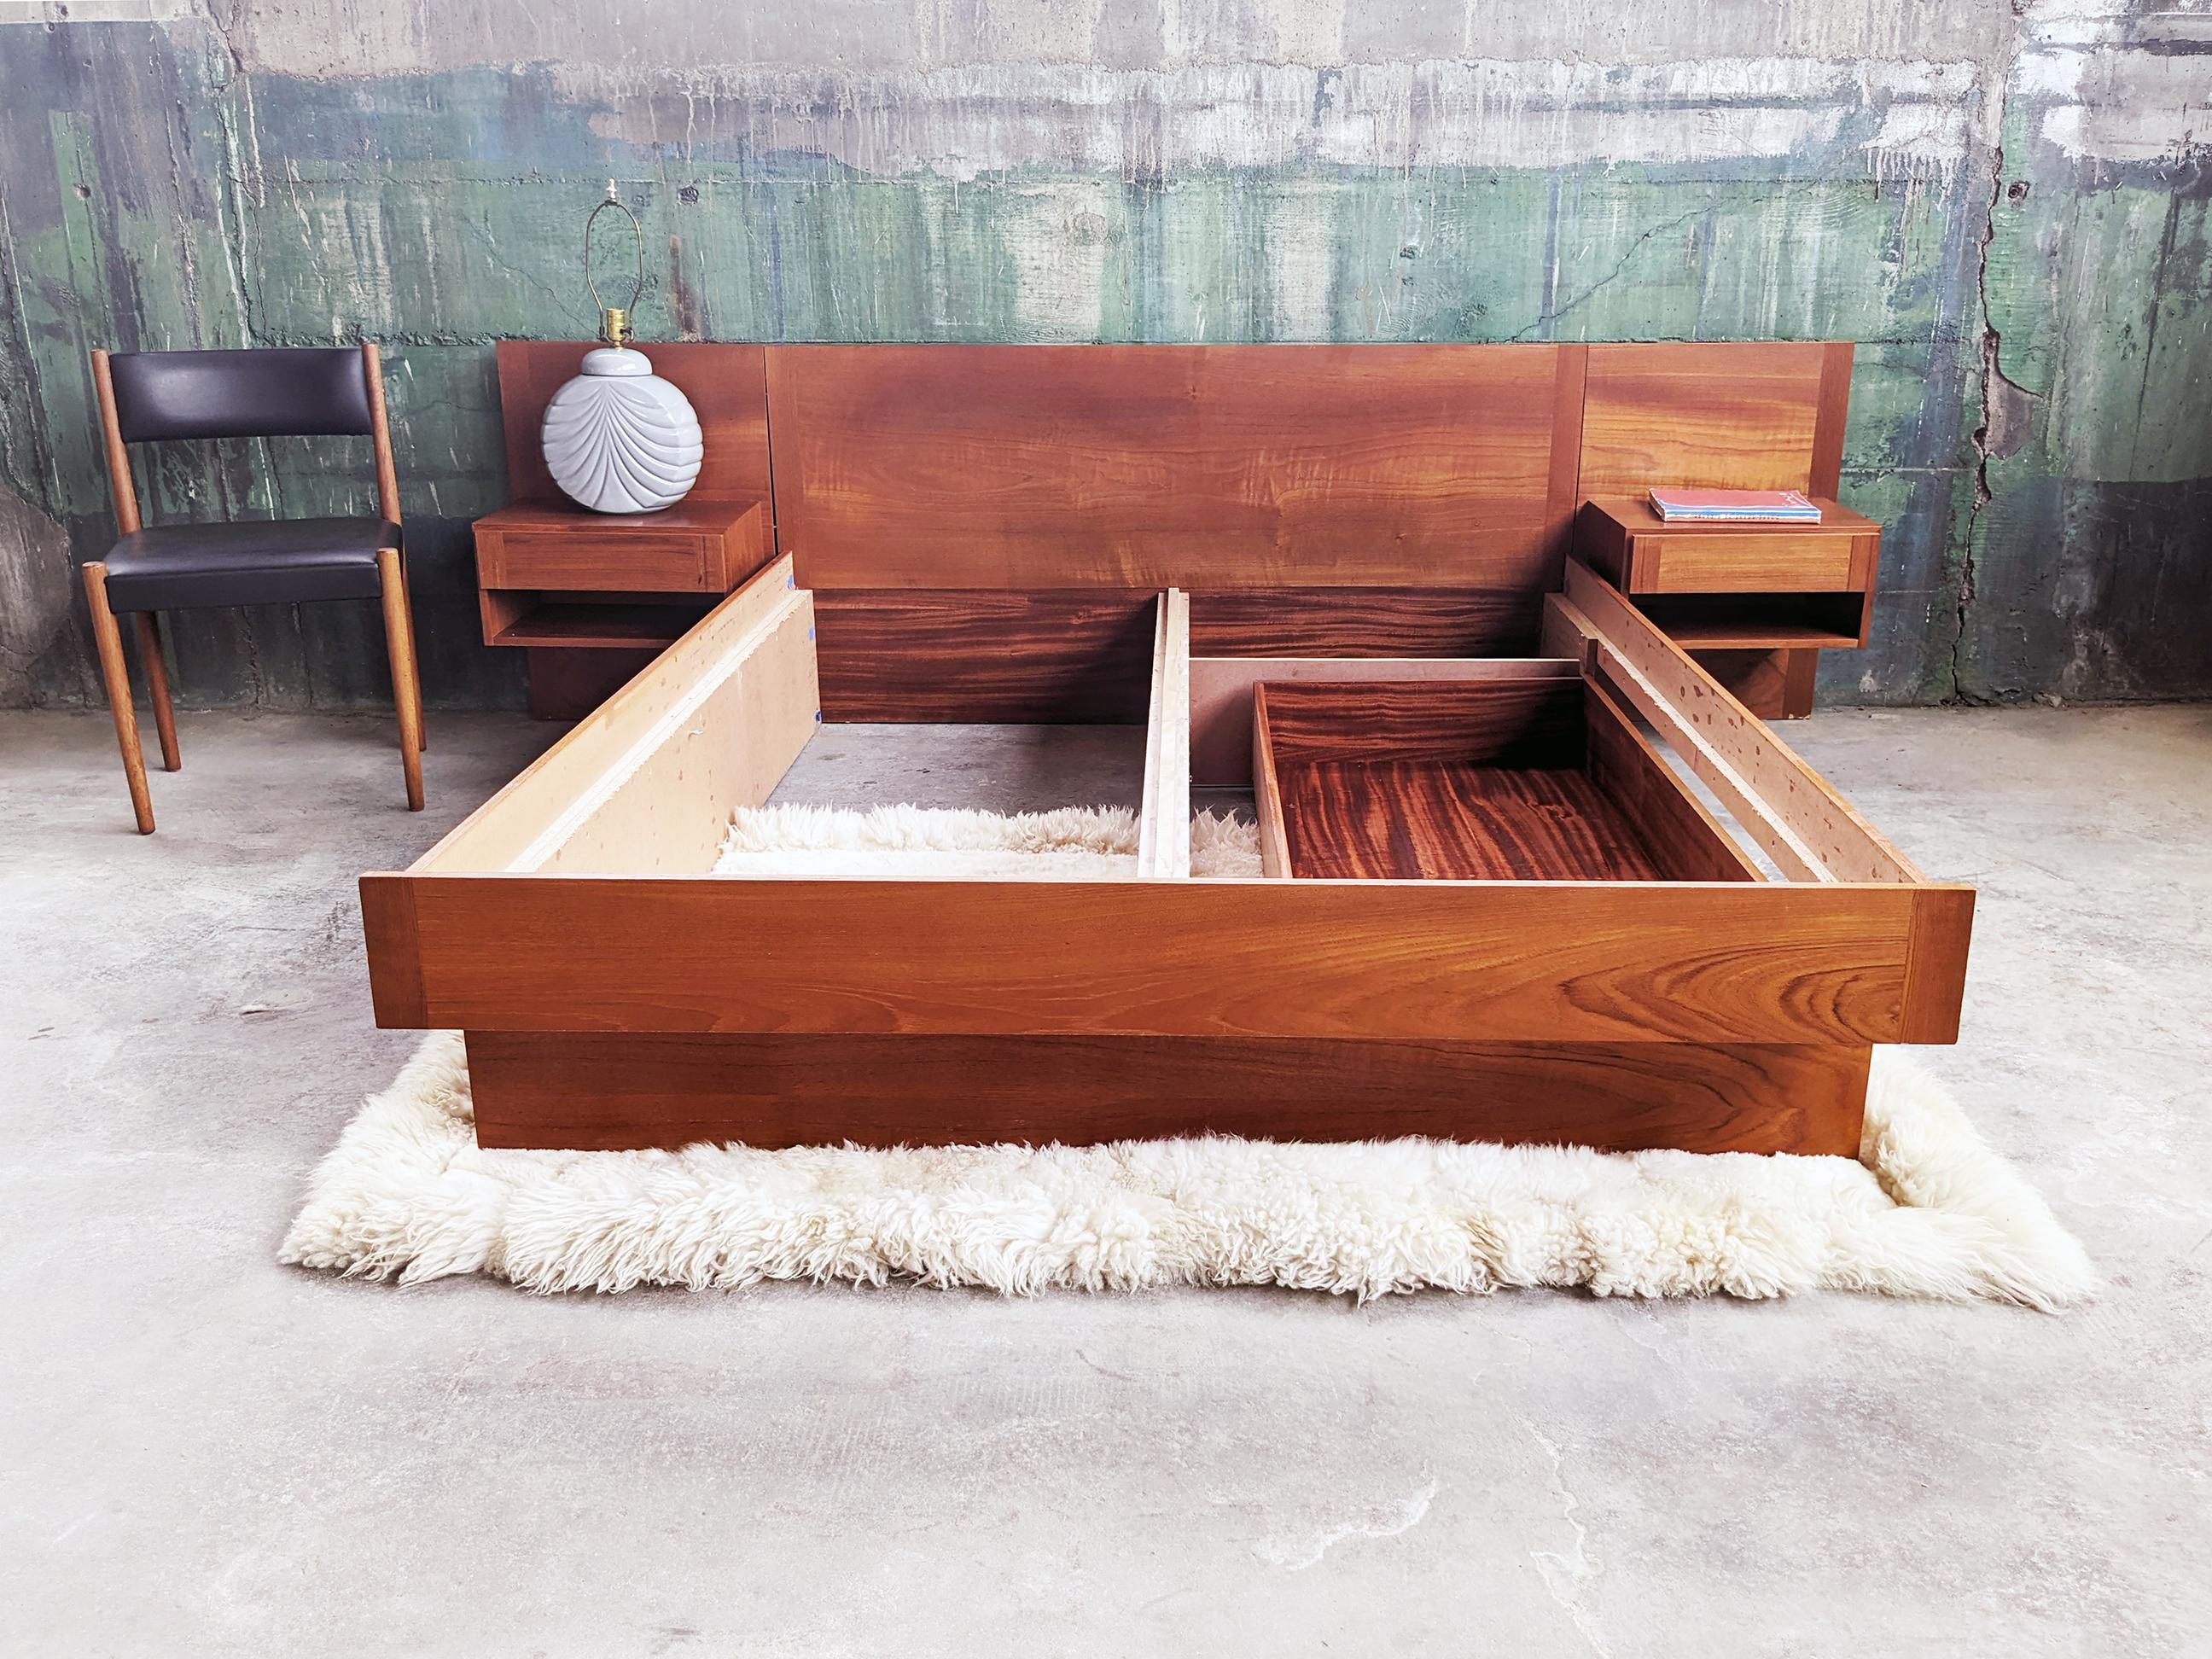 This bed has it all!!-- Sleek Danish mid century design, a Beautiful teak grain veneer frame, Storage end tables on each side AND under the bed storage drawer! Very sought after Original Vintage Danish Modern Teak Queen Bed + Two Attachable